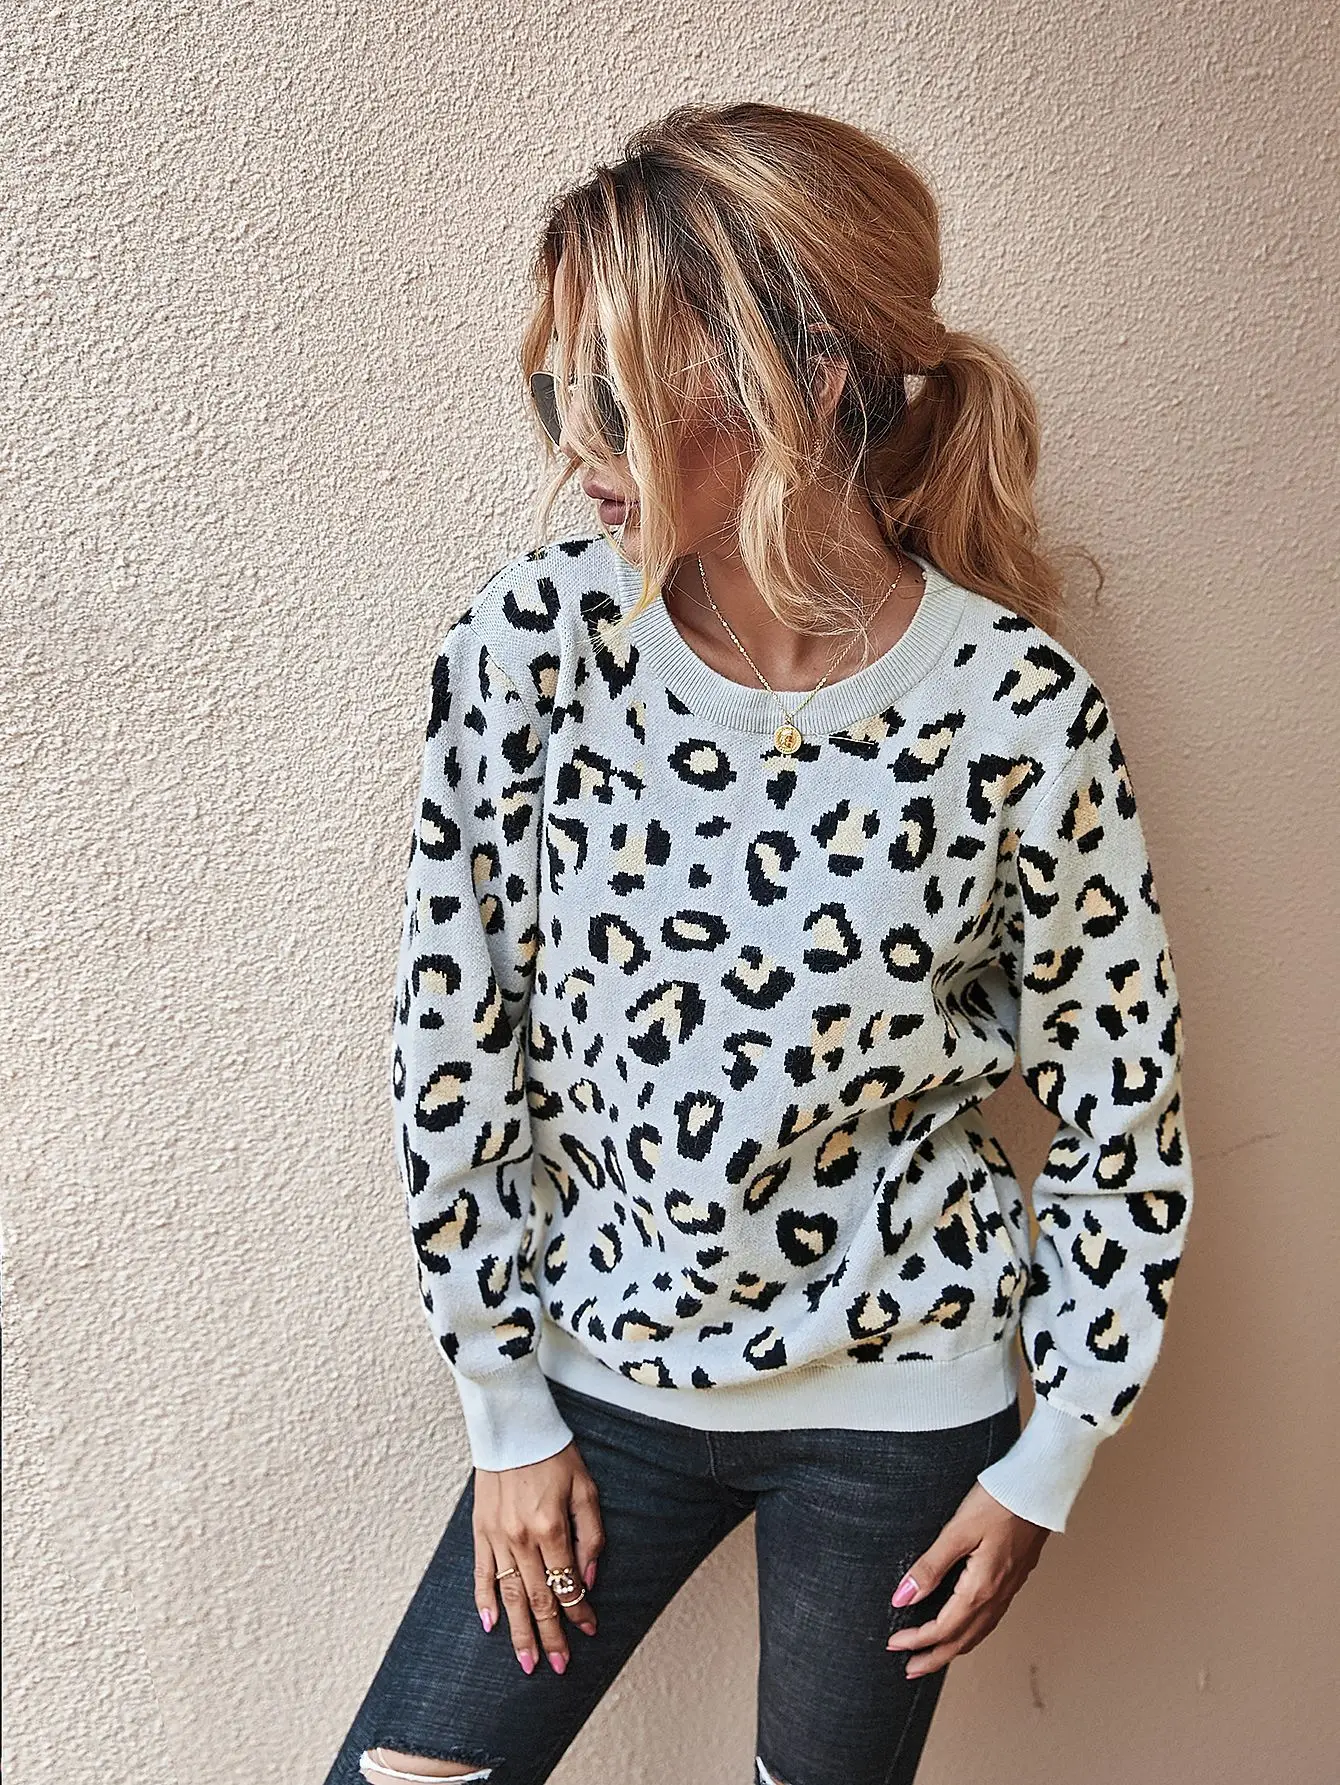 High Quality Fashion Women Knitted Sweaters Leopard Print Ladies Long Sleeve White Sweater Female Jumper Femmes Pullovers Lady striped sweater